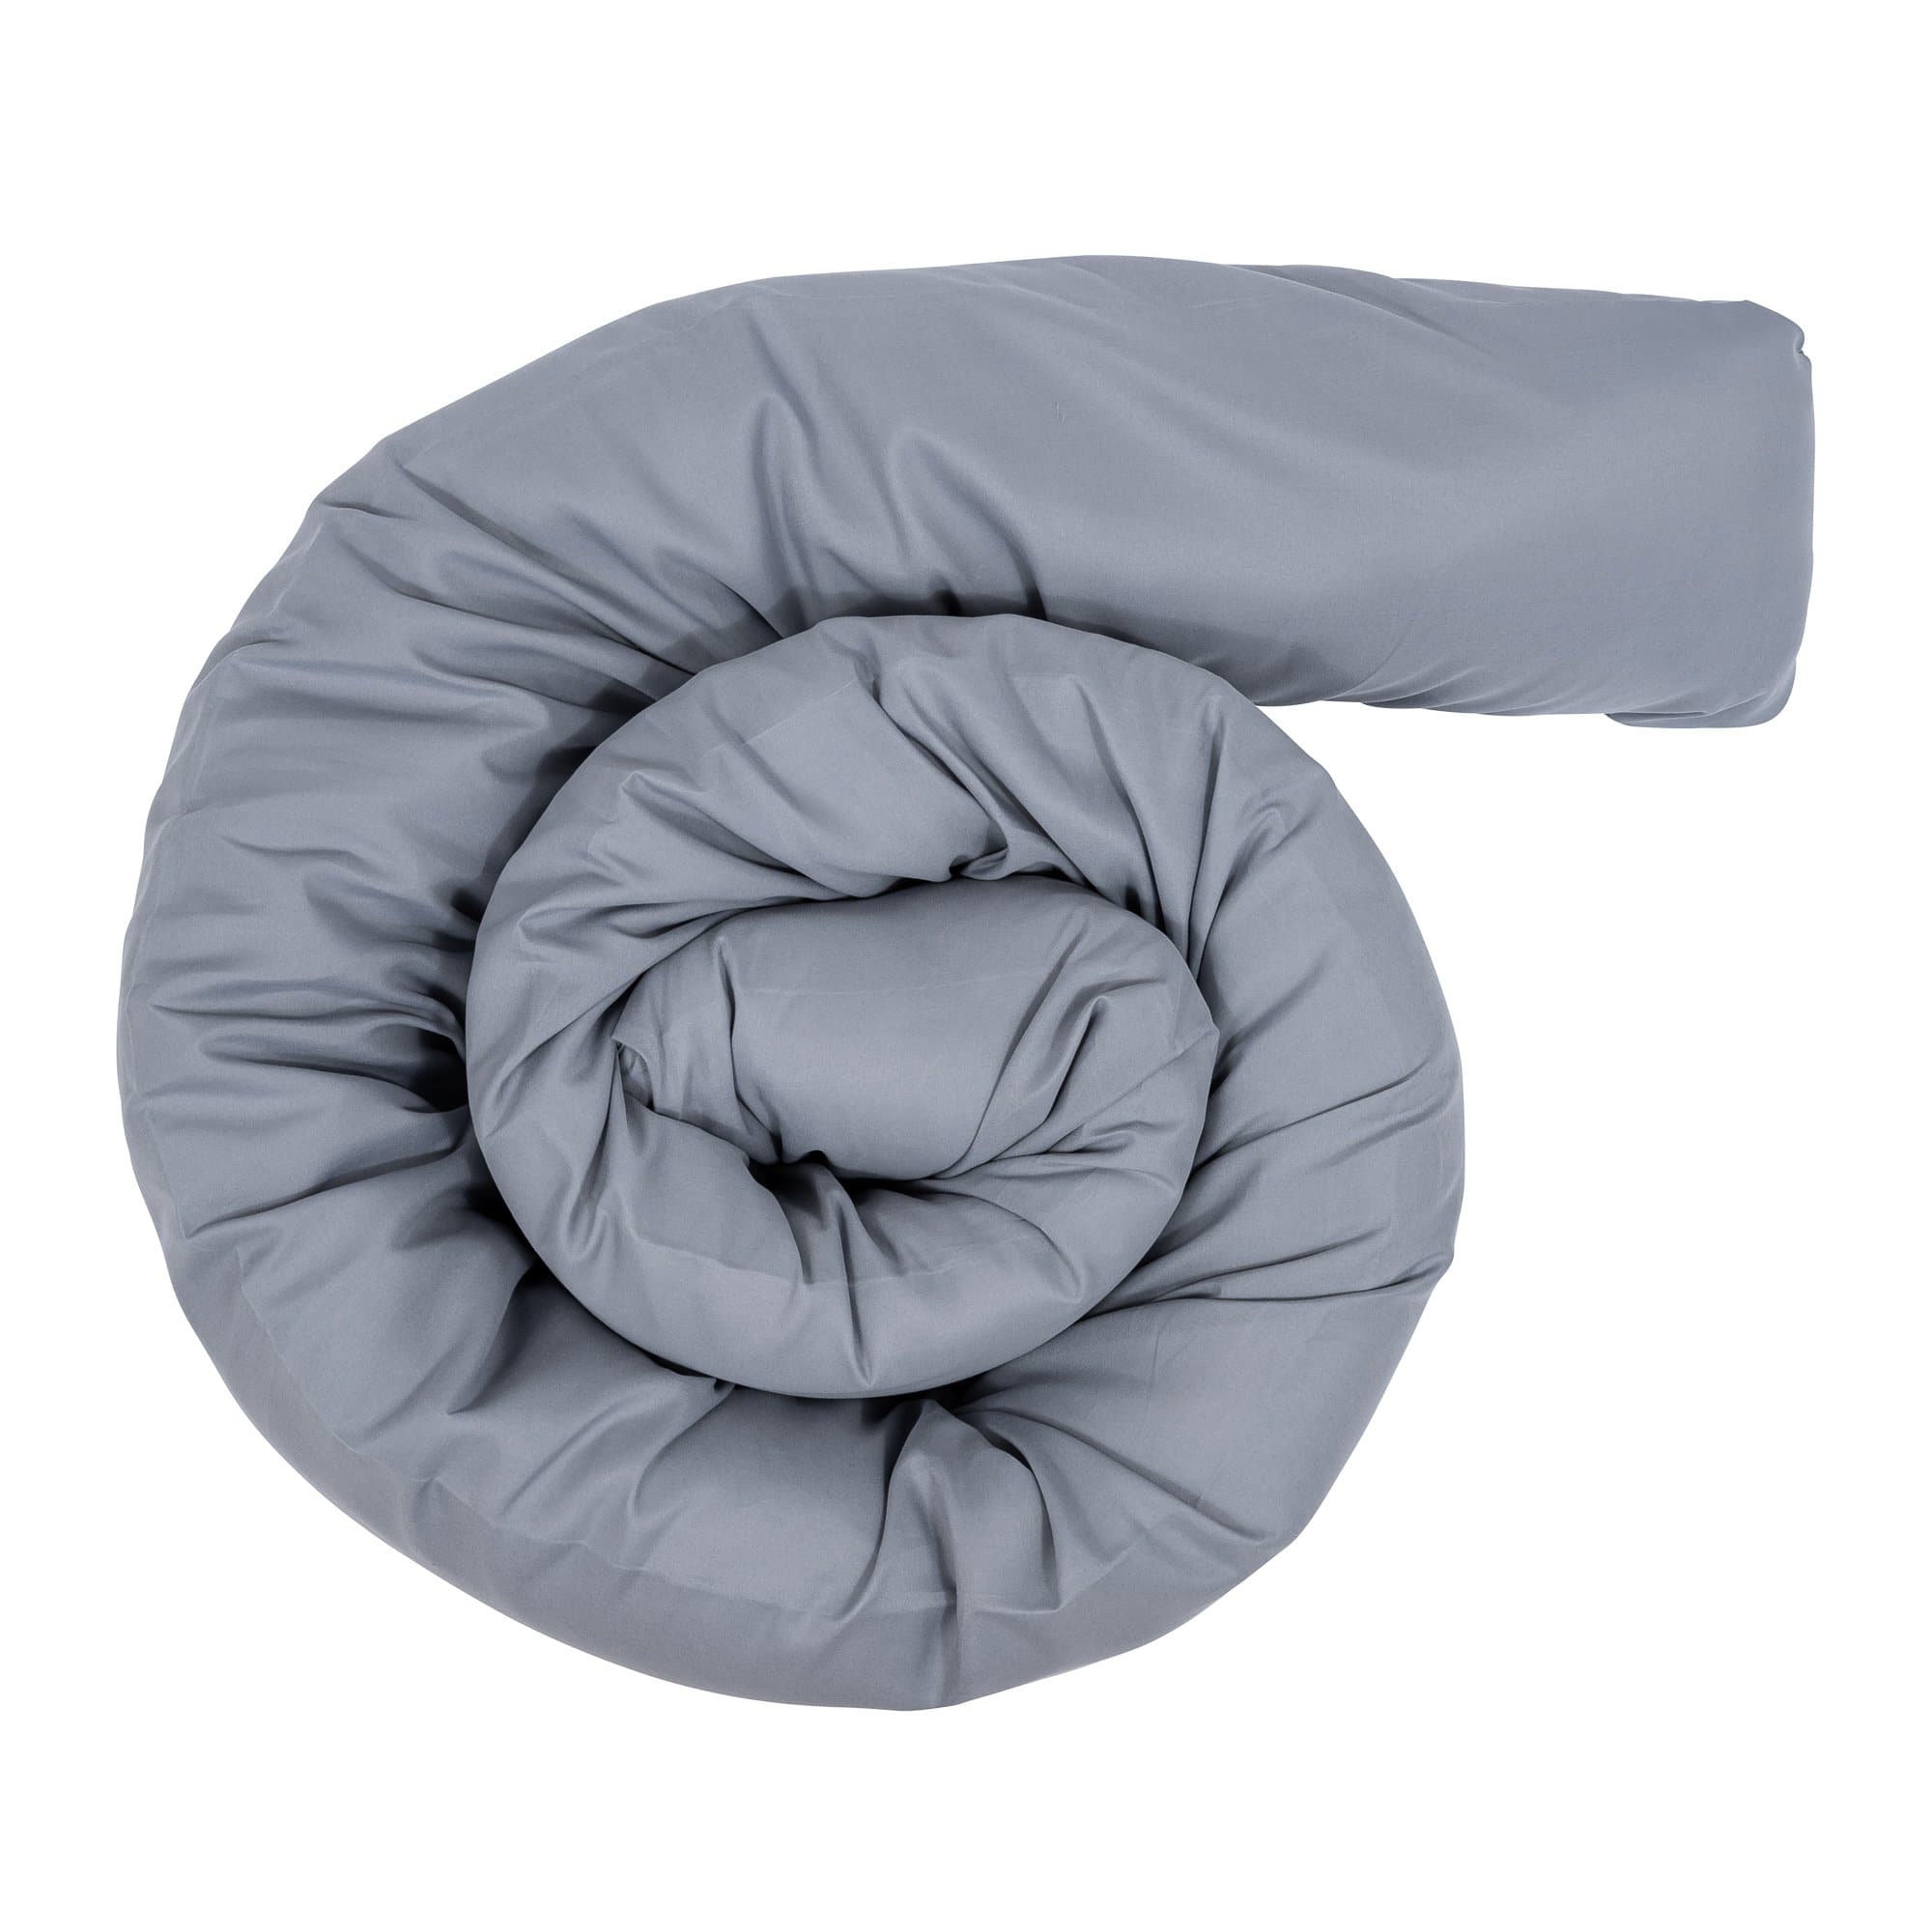 9 Ft Maternity Pillow And Case - Grey - For Your Little One